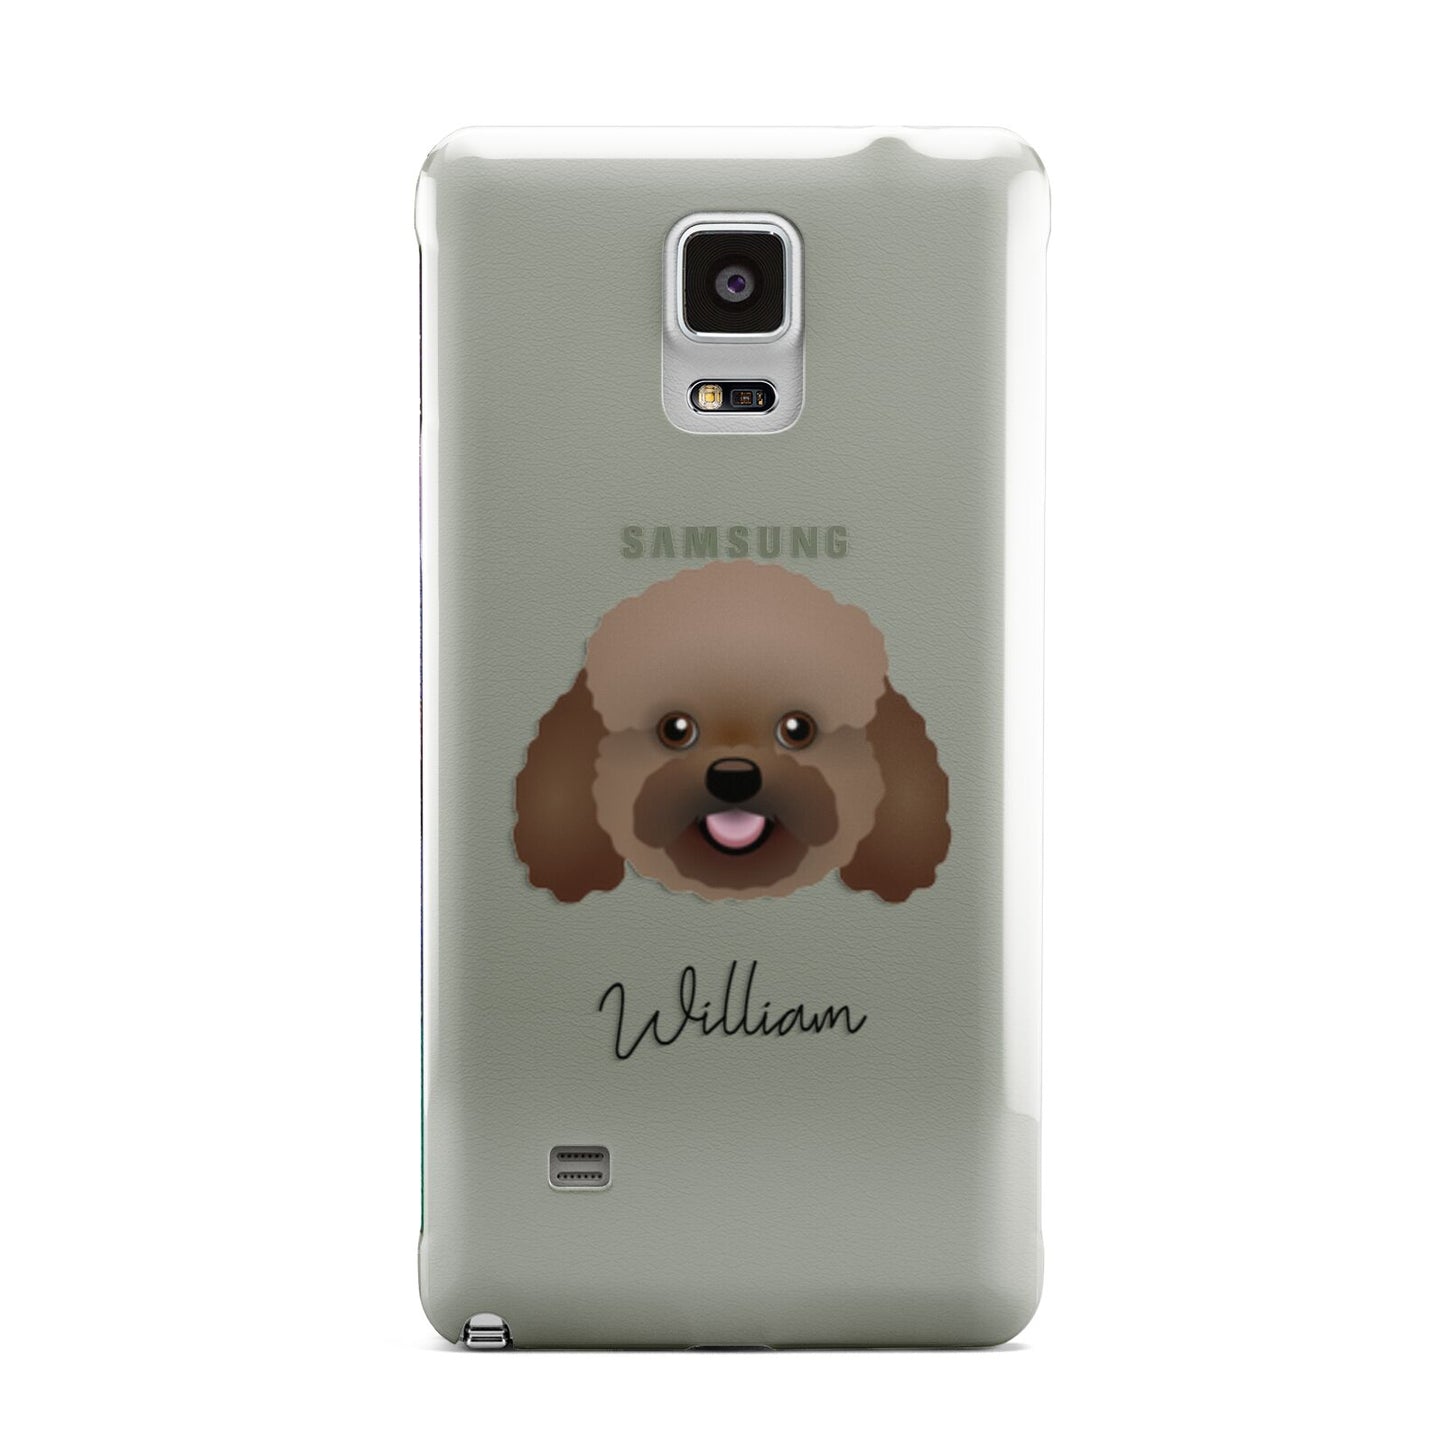 Bich poo Personalised Samsung Galaxy Note 4 Case